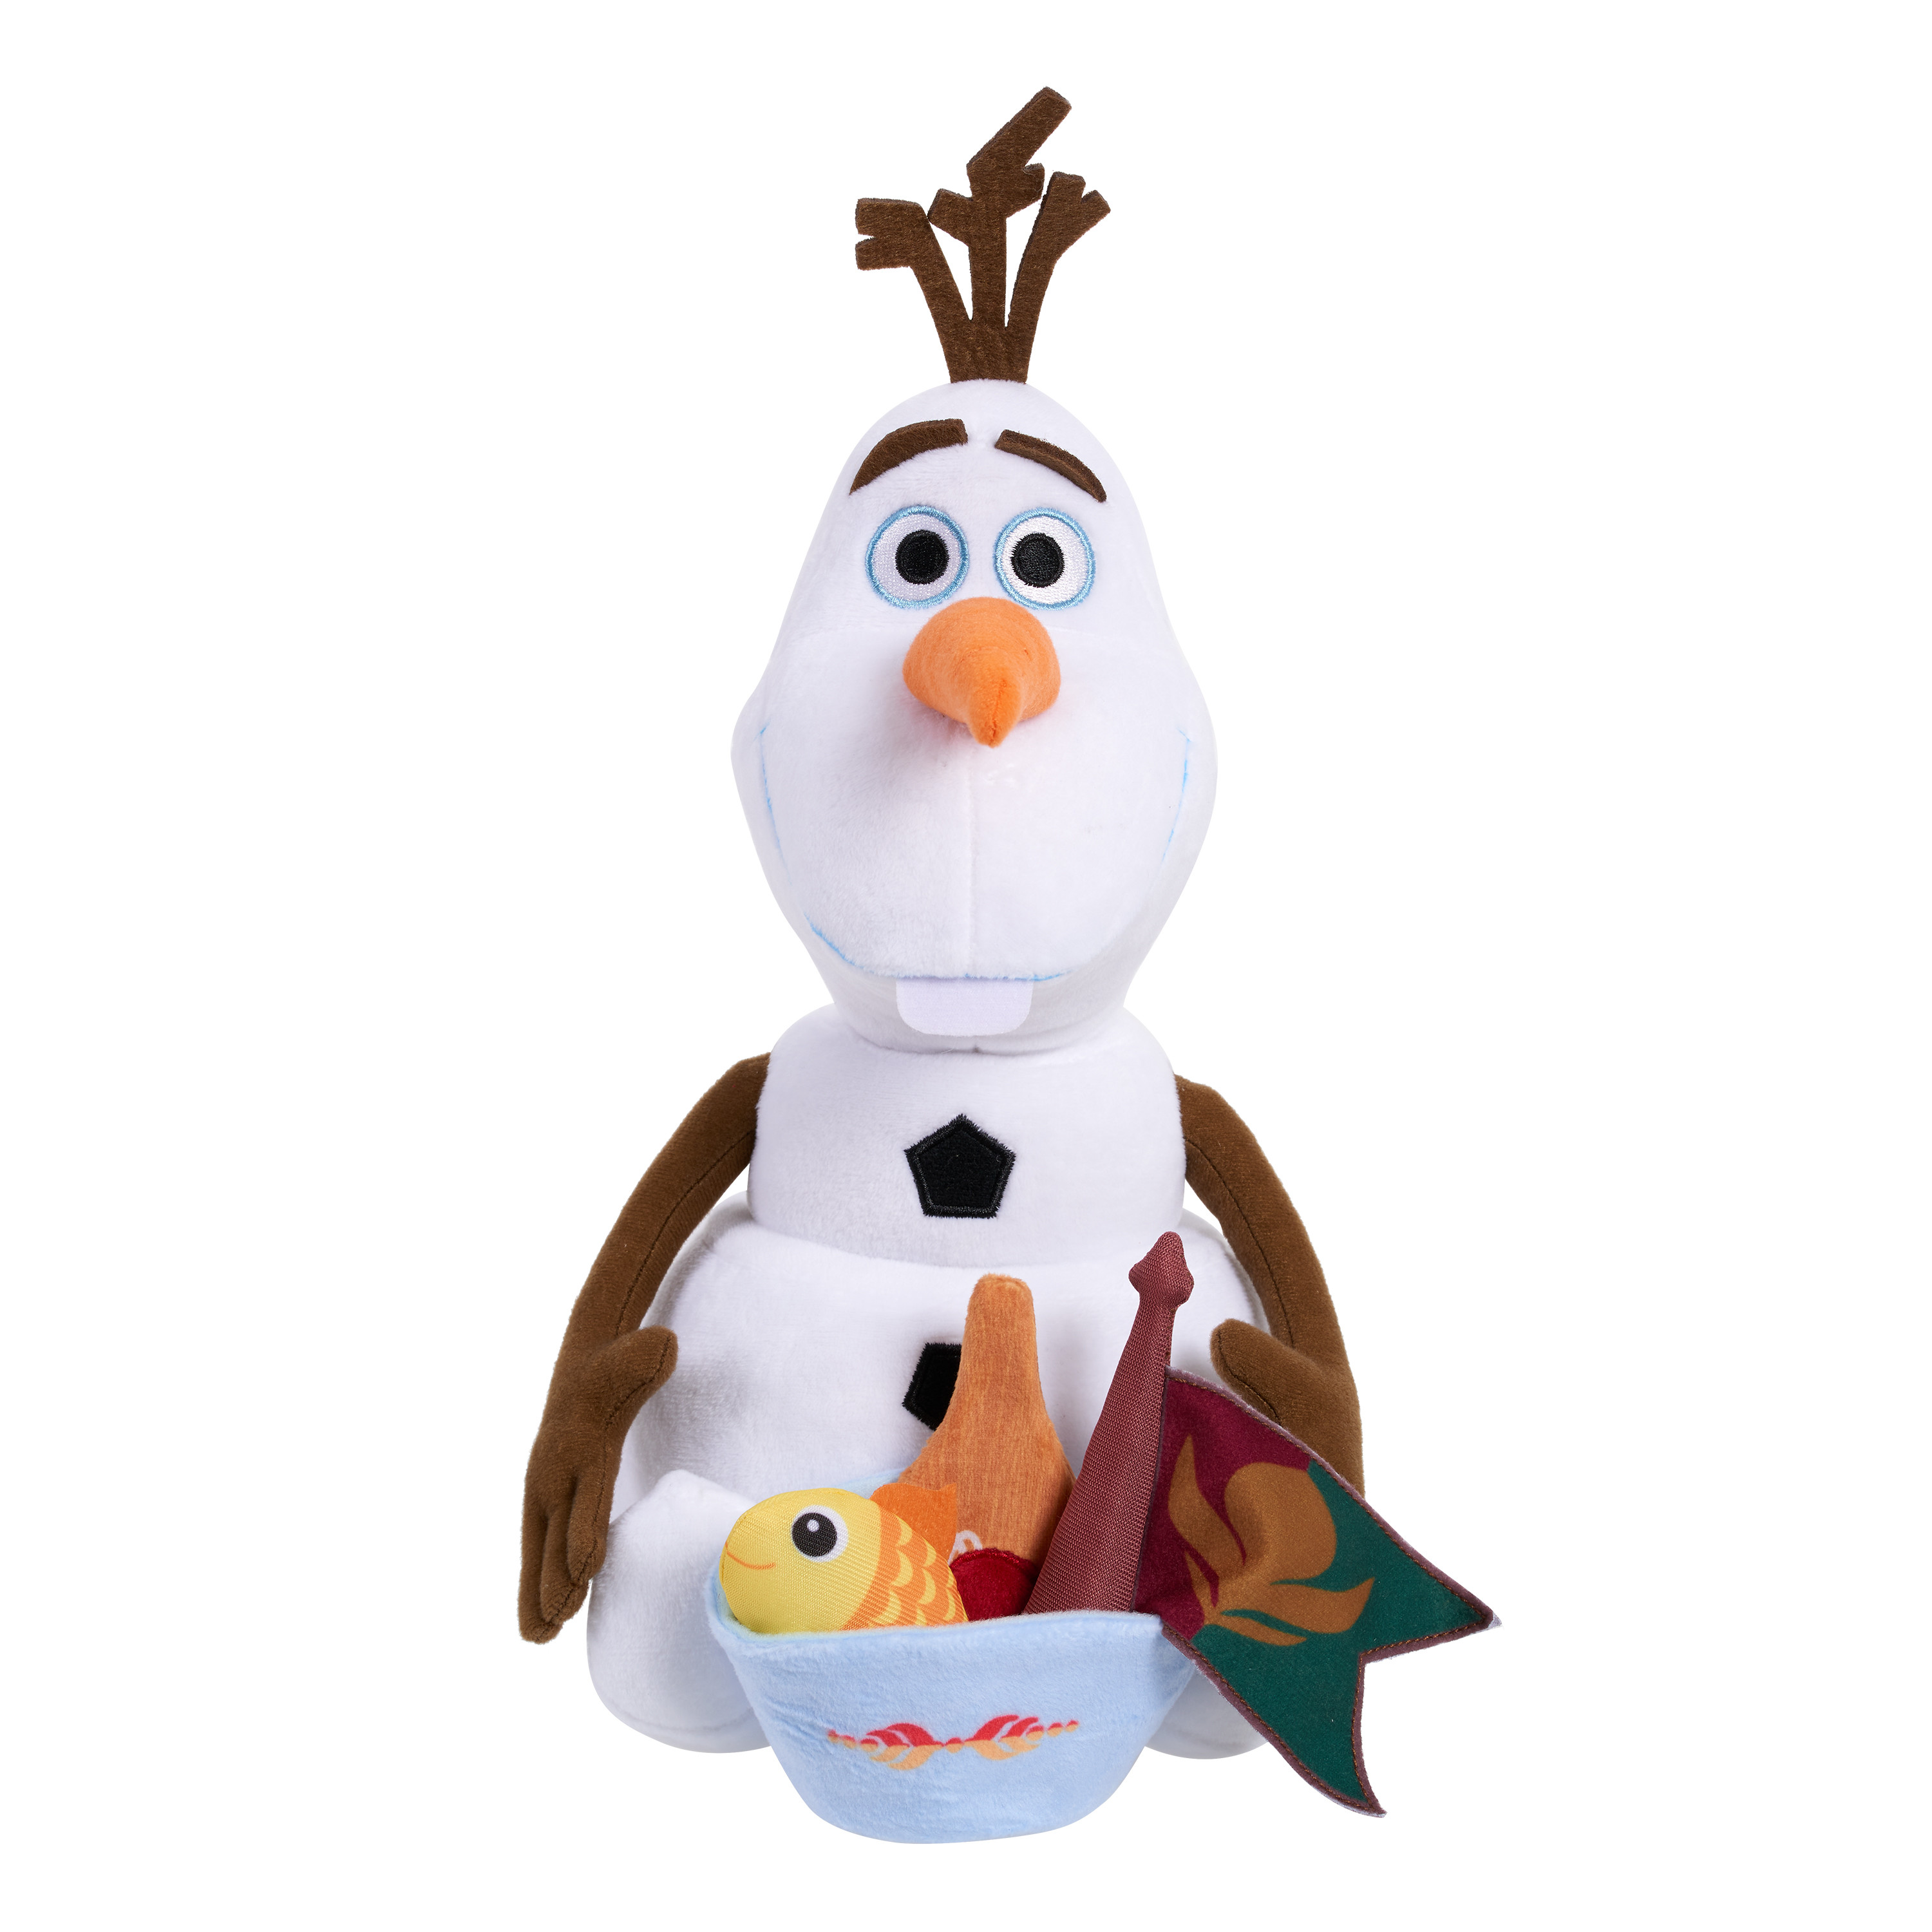 Disney Frozen Find My Nose 14-inch Olaf Plush, Officially Licensed Kids Toys for Ages 3 Up, Gifts and Presents - image 4 of 4